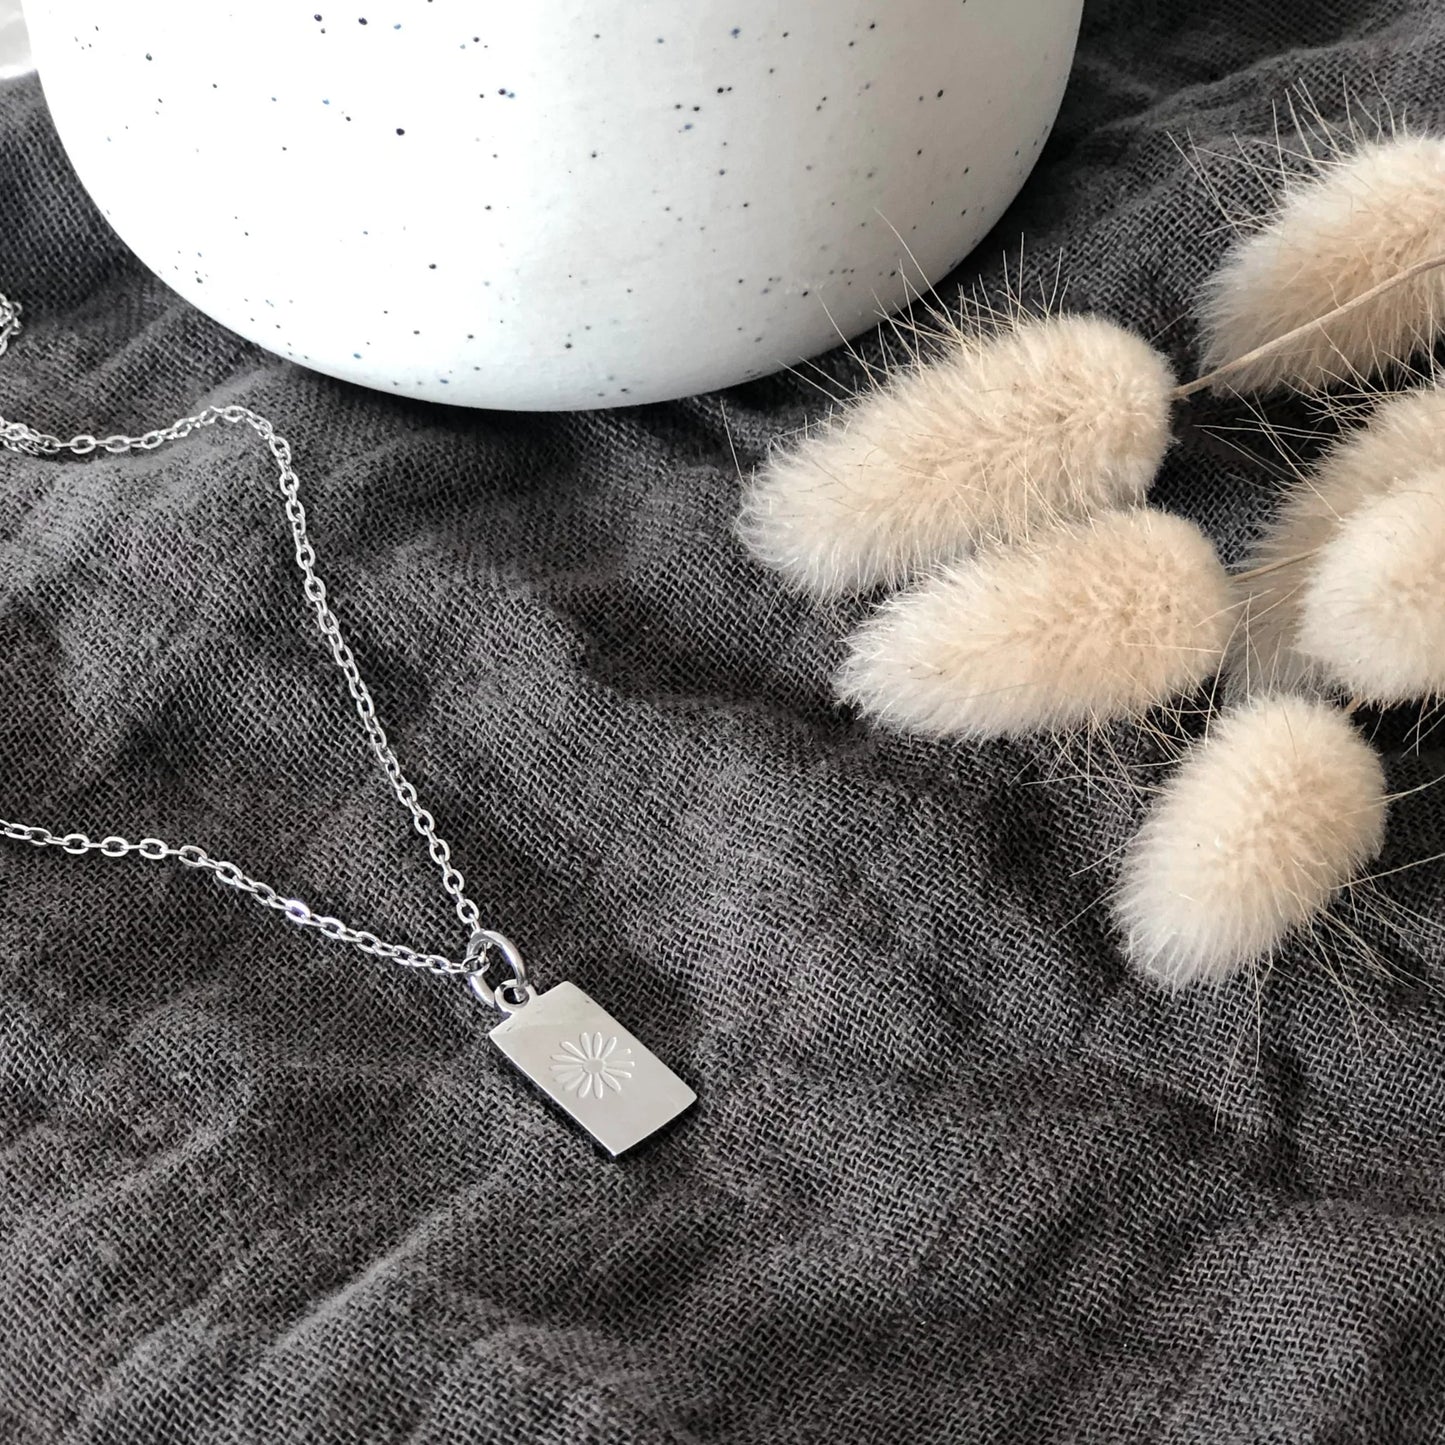 Katy B Etched Daisy Necklace